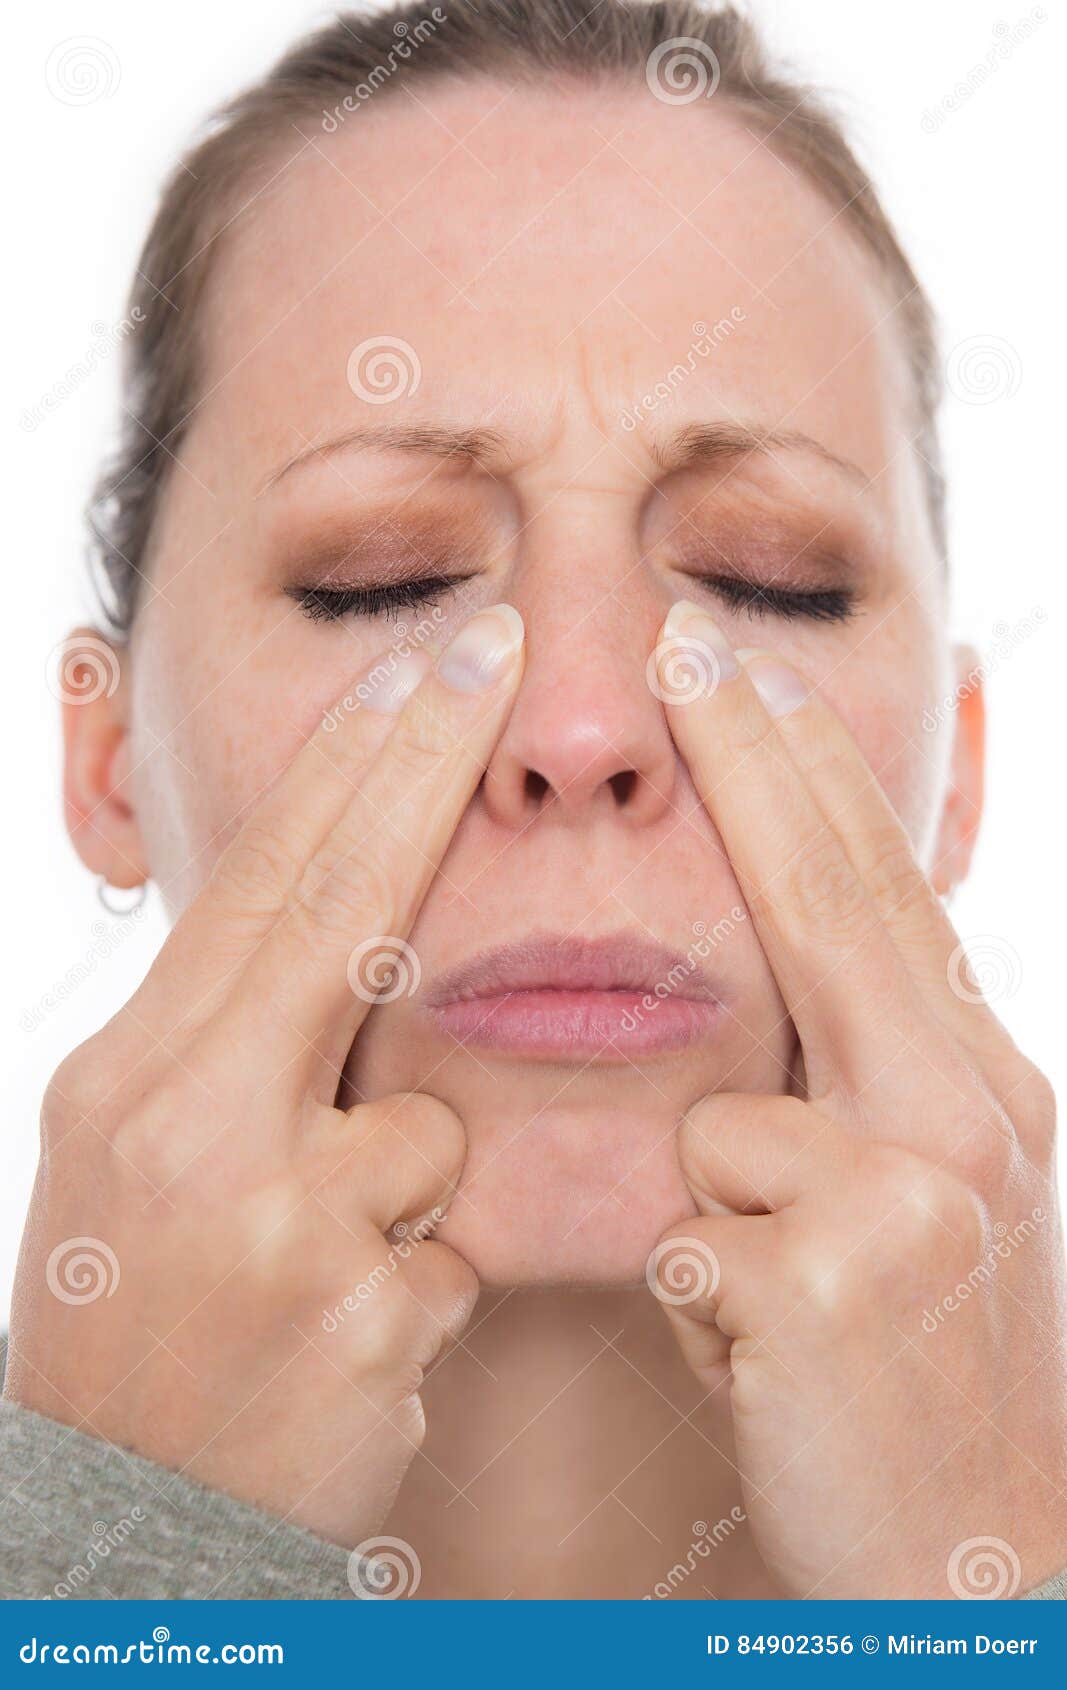 young woman with a acute sinusitis